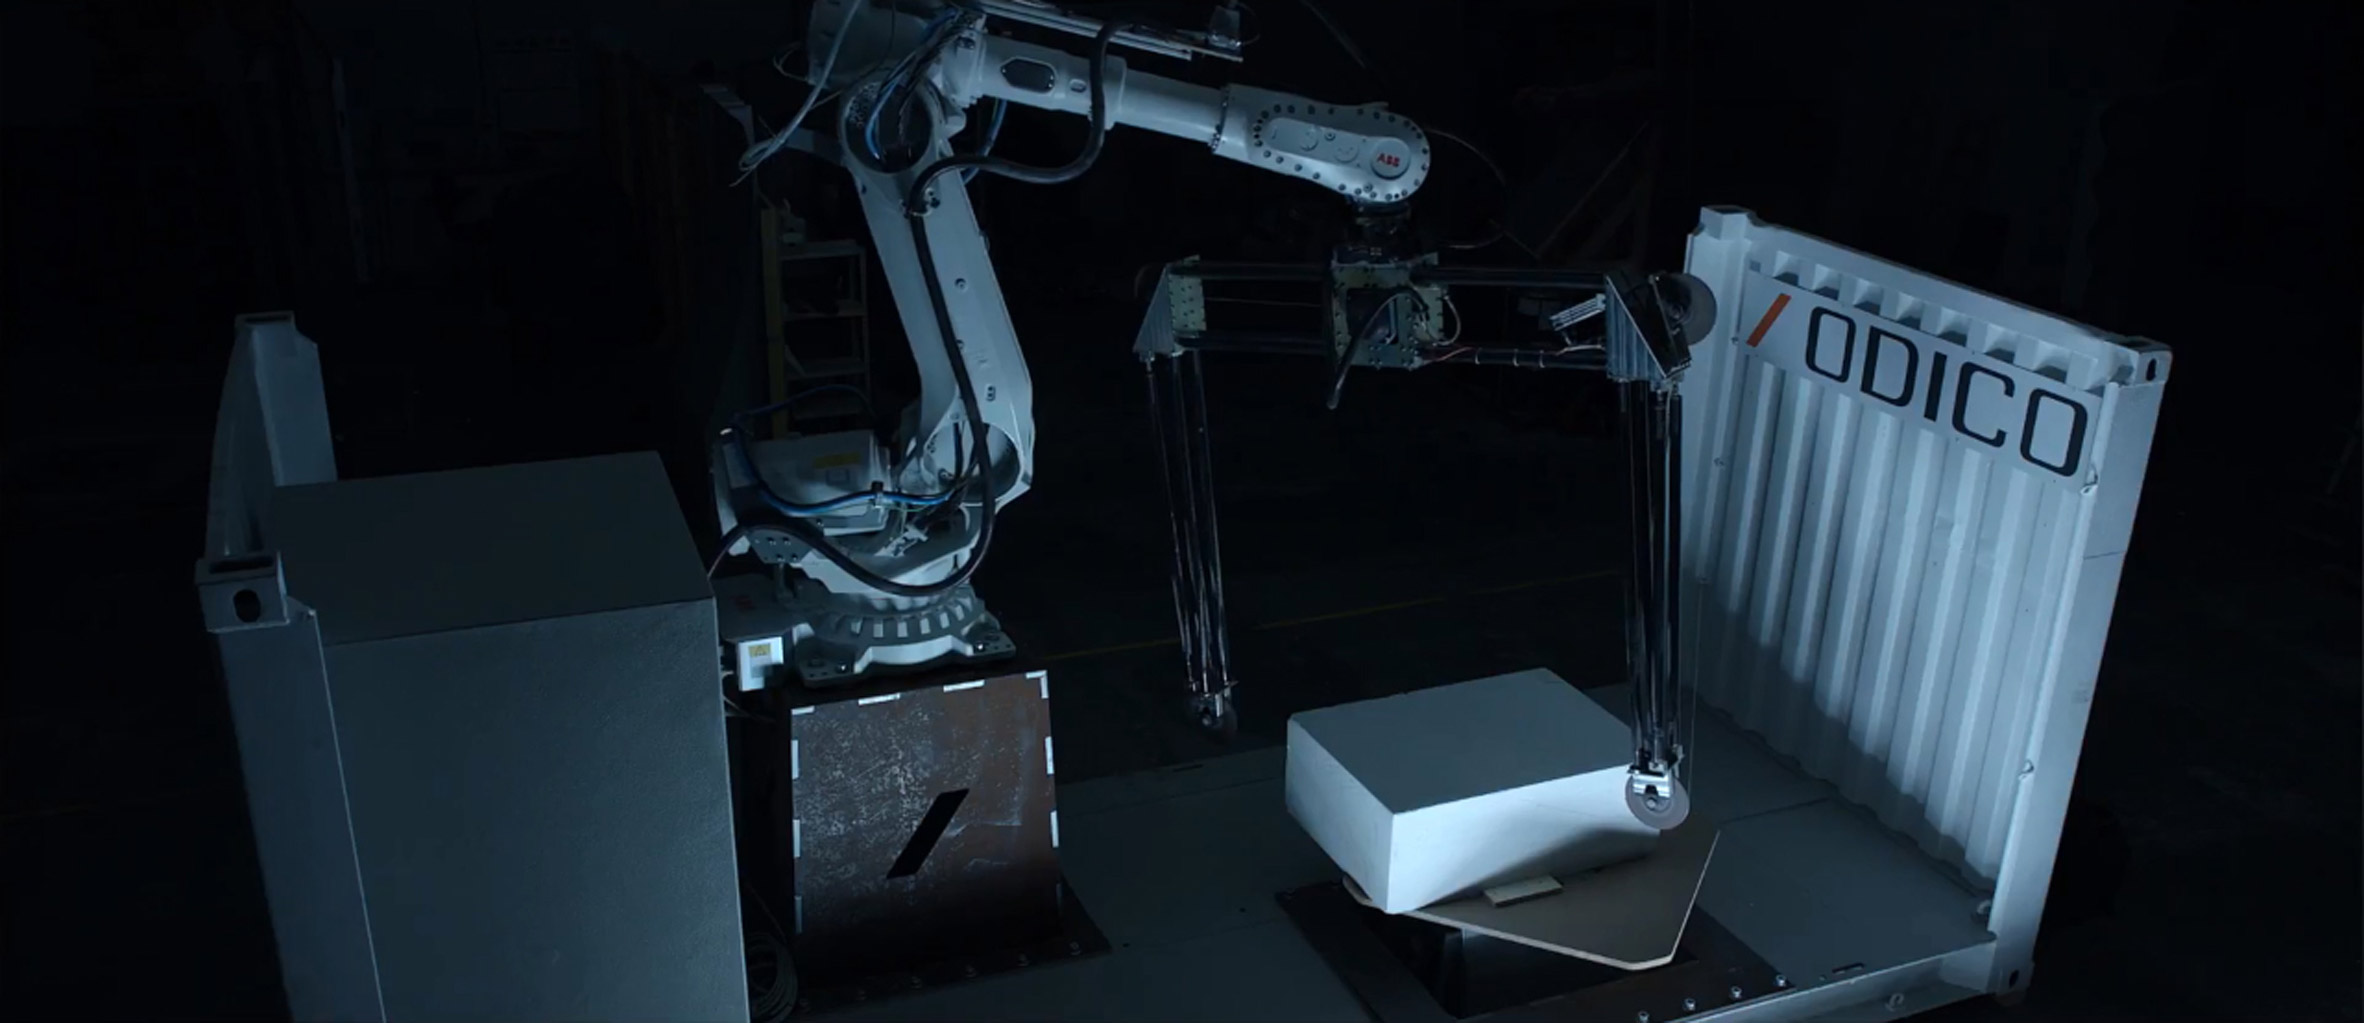 Odico's Factory on the Fly offers pop-up robotic manufacturing unit for construction sites